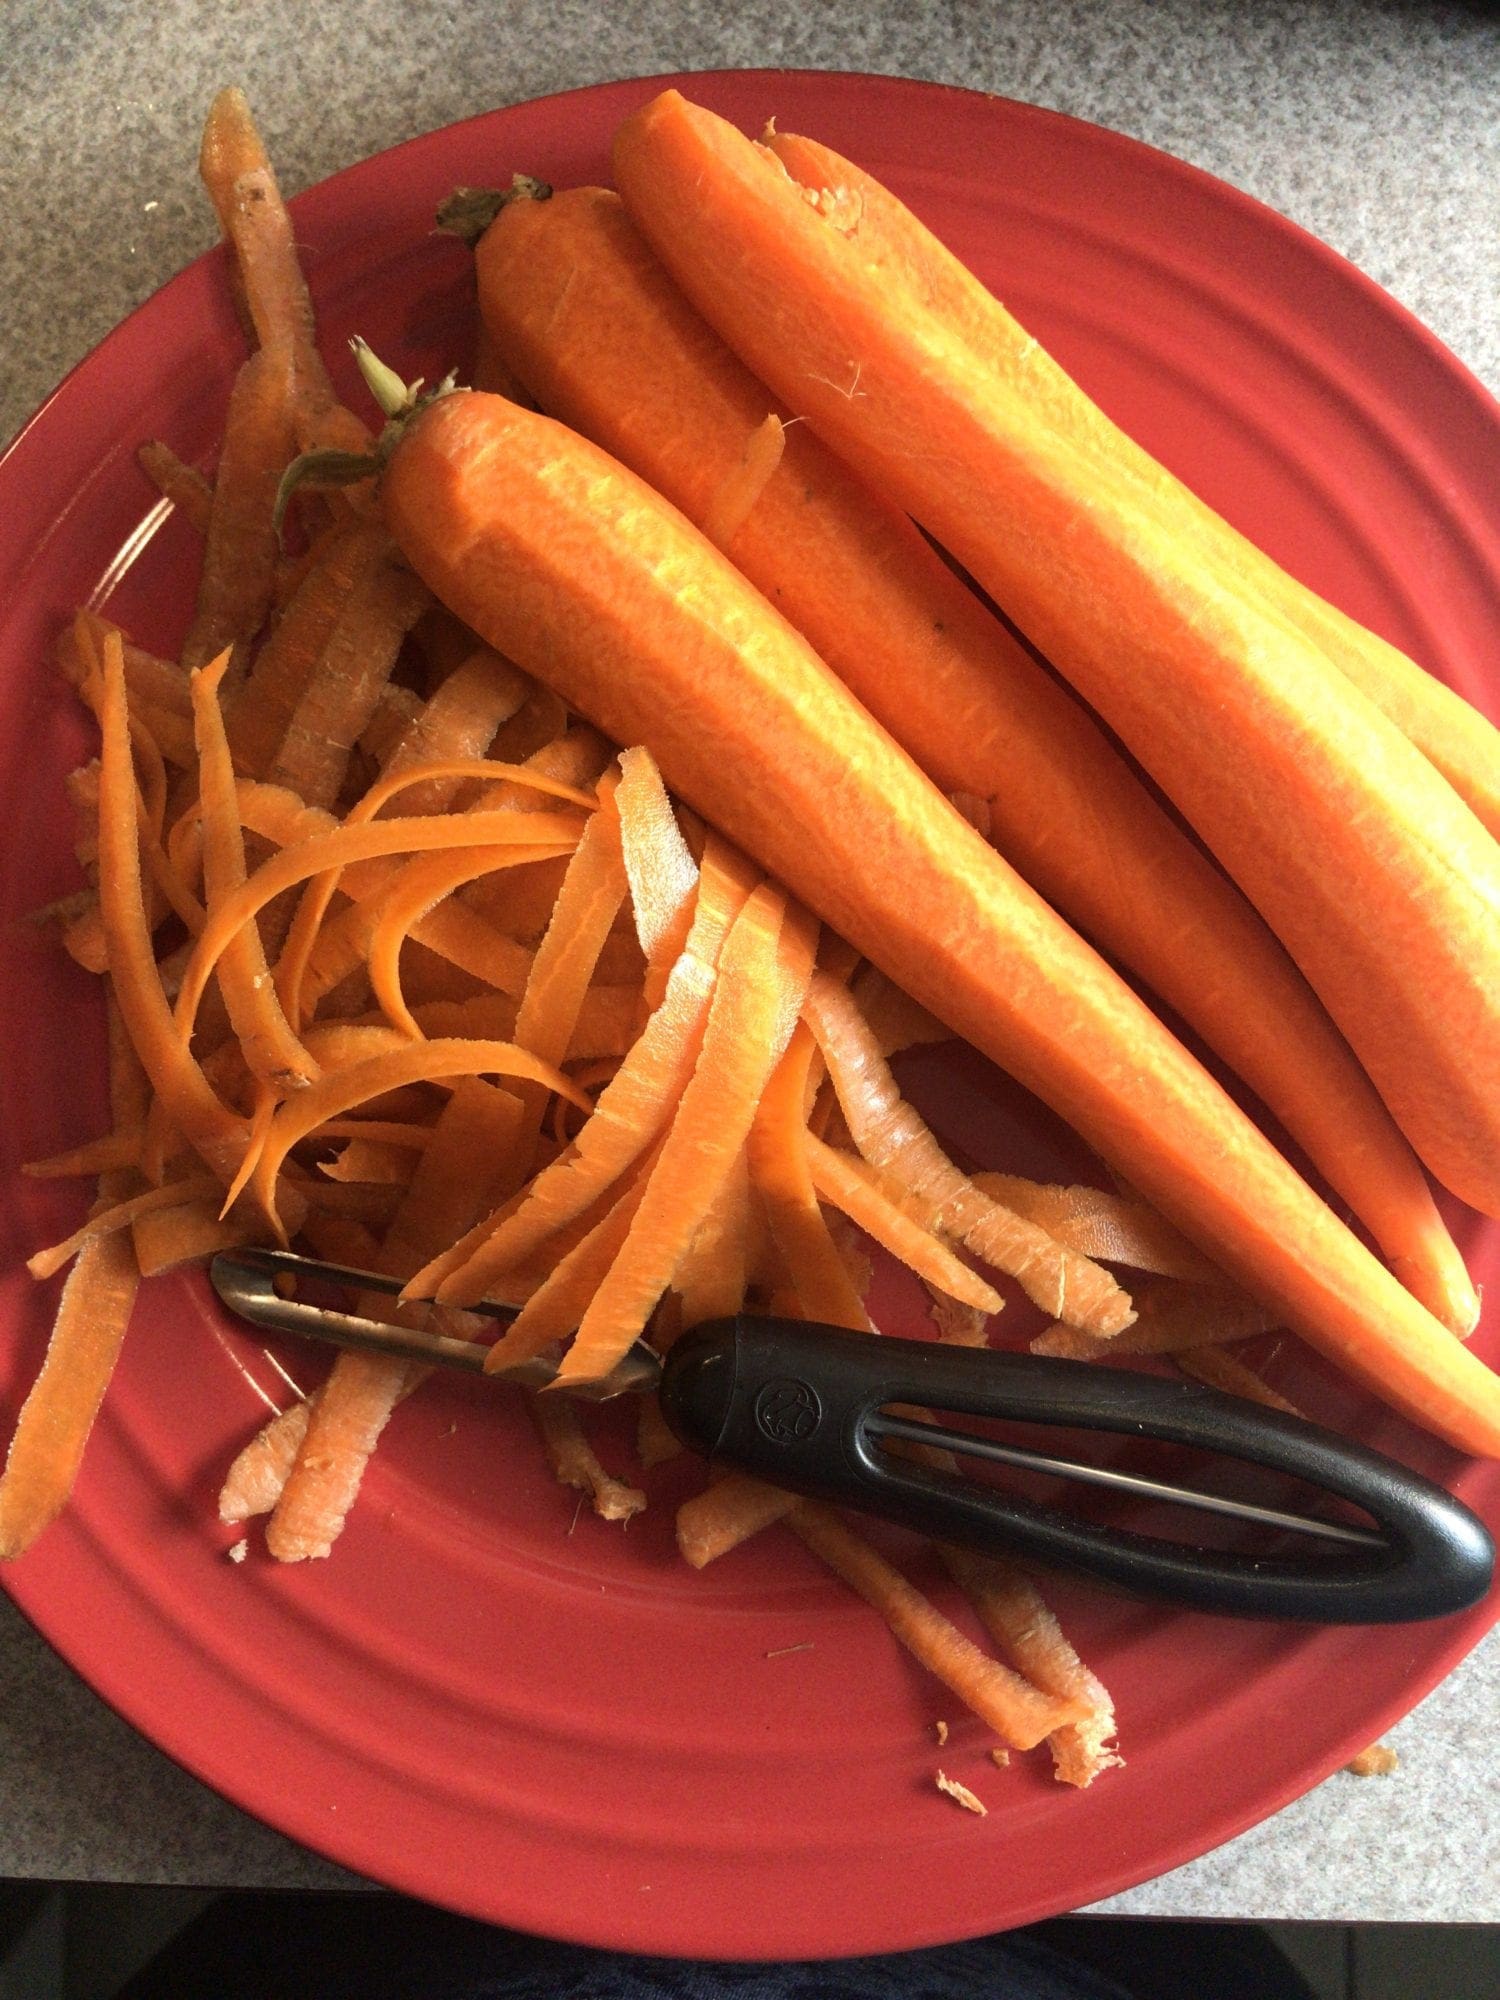 Use a vegetable peeler to peel the carrots.